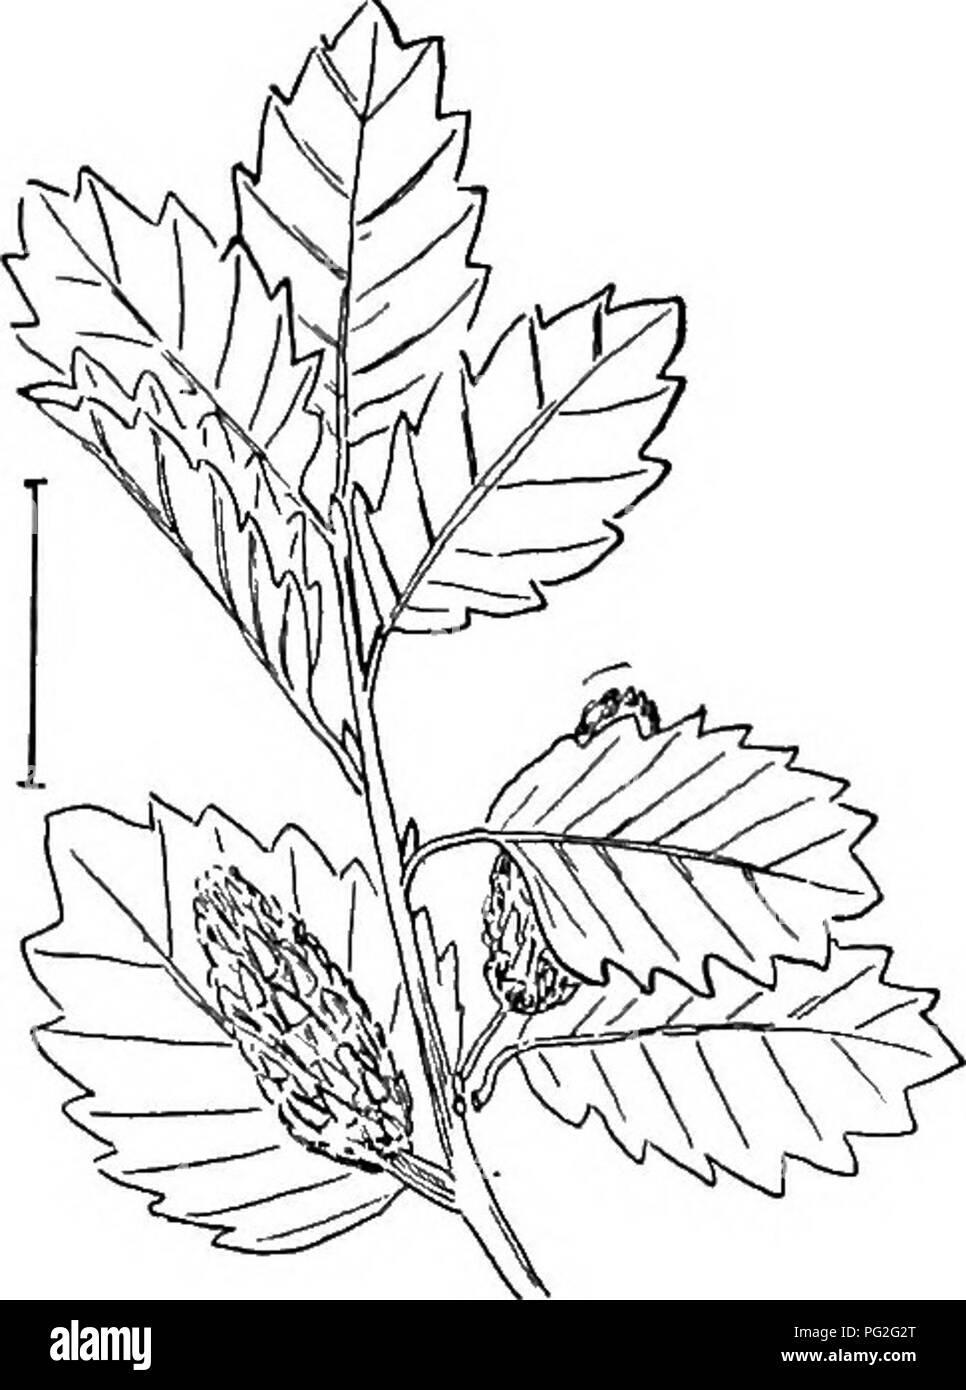 . Ornamental shrubs of the United States (hardy, cultivated). Shrubs. Fig. 554. — Dwarf Birch. Fig. 555. — Low Birch. Birch (555) — Betula ptimila, — 2 to 15 feet high with longer and less rounded leaves having dense brownish hairs below when young; and Shrdbbt Birch (556) — Betula hiunilis, — 2 to 6 feet high, with glandular twigs and crenately-serrate smooth leaves ^ to 1J inches long. [Seeds.] Alnus. The Alders are generally shrubby plants growing abundantly along streams and in damp places. They have alternate simple straight- veined notched deciduous leaves and dry rounded cones which rem Stock Photo